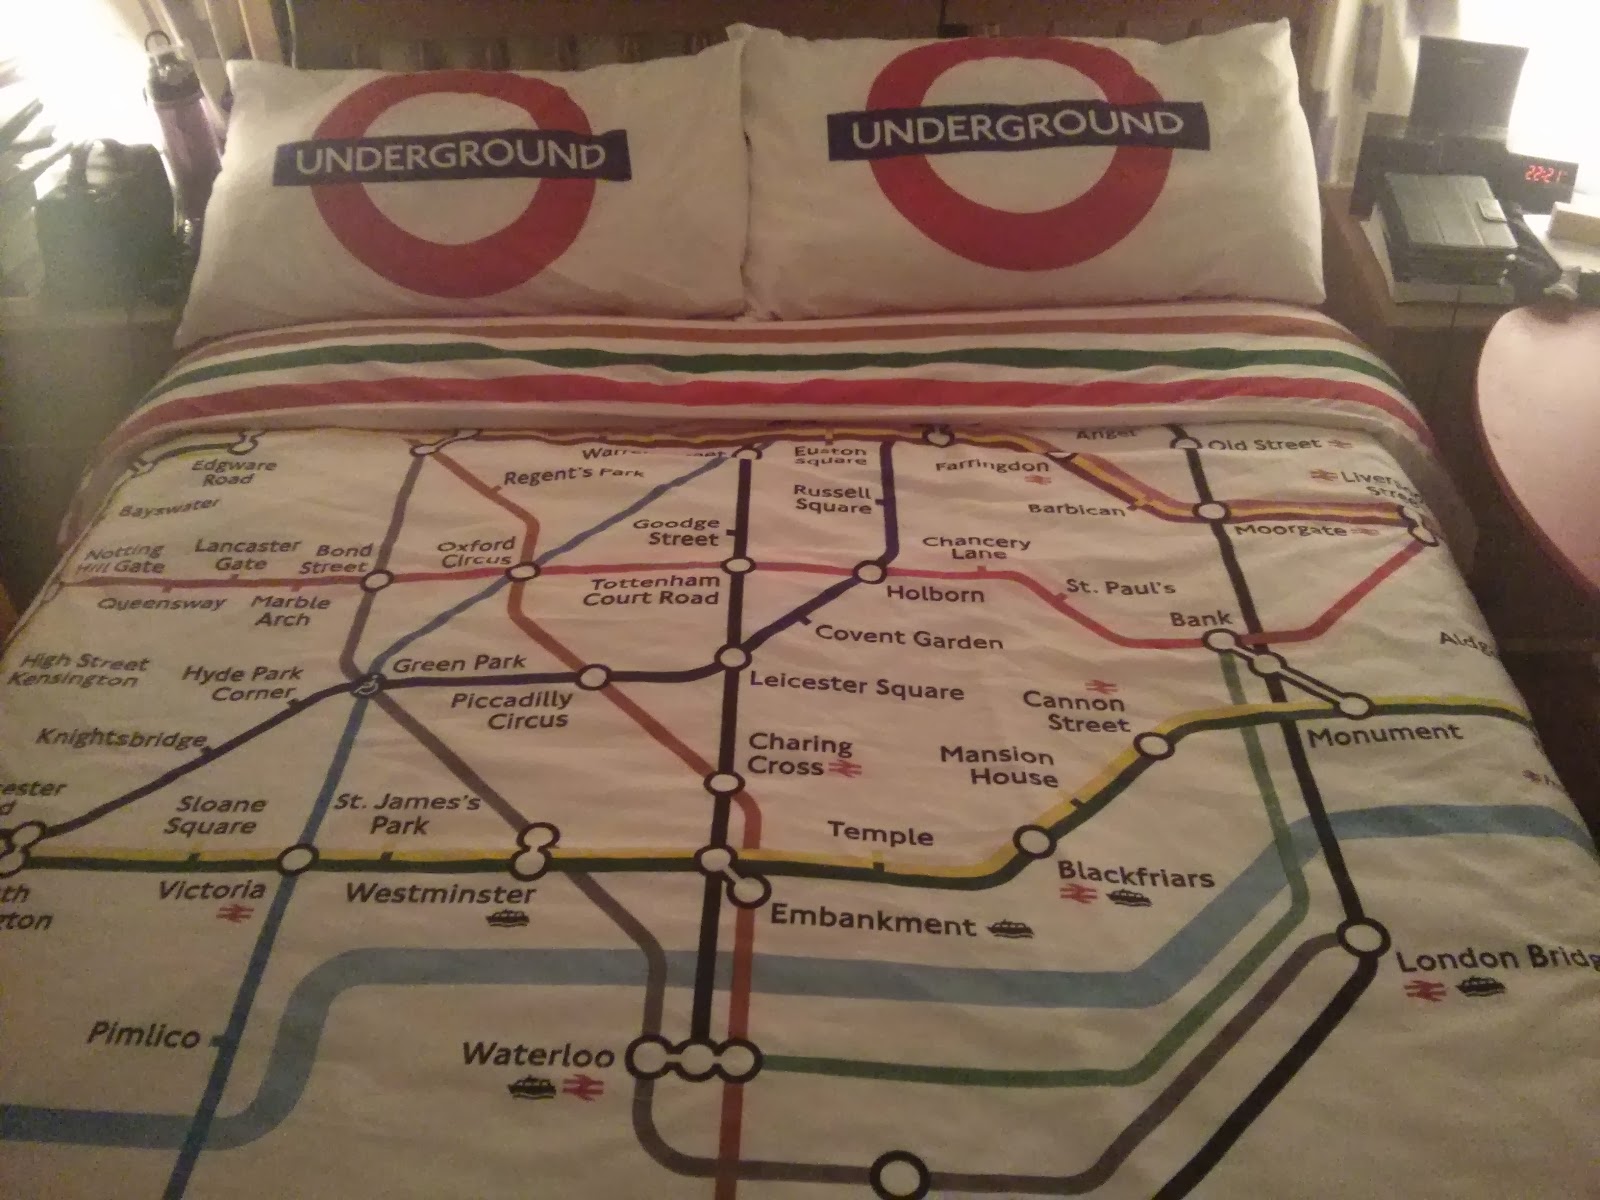 Underground bedlinen. Perfect for memorising the stops on the Northern Line